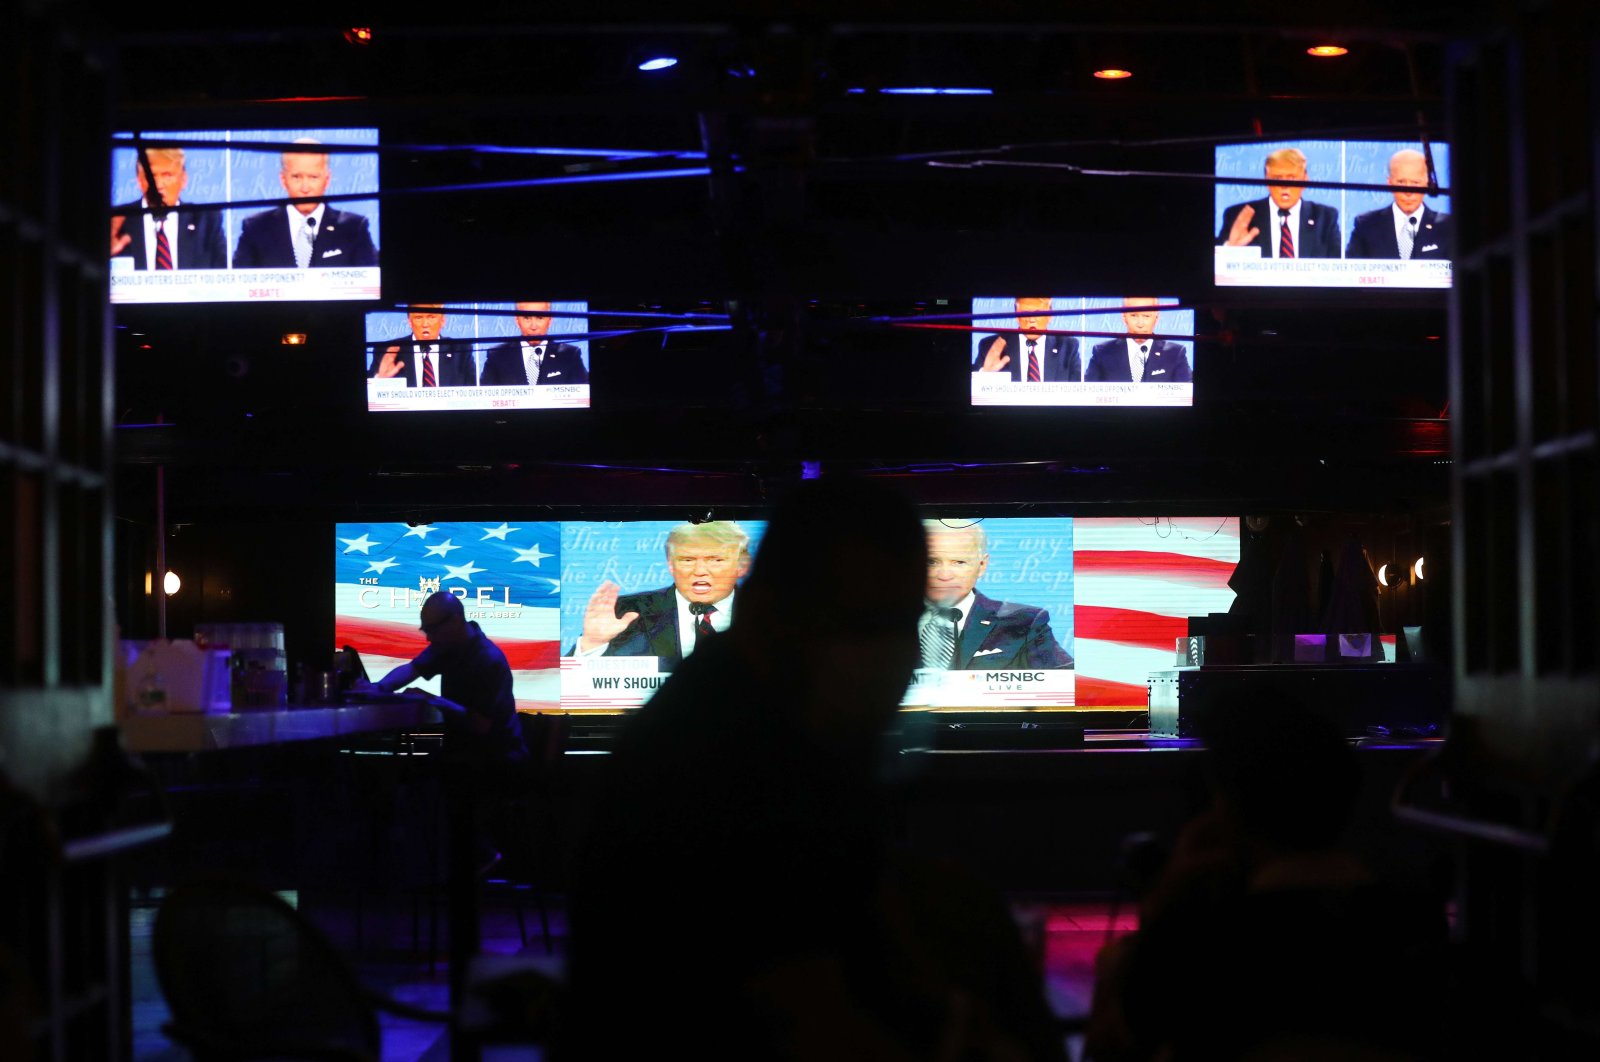 A broadcast of the first debate between U.S. President Donald Trump and Democratic presidential nominee Joe Biden is shown on televisions, in West Hollywood, California, U.S., Sept. 29, 2020. (AFP Photo)